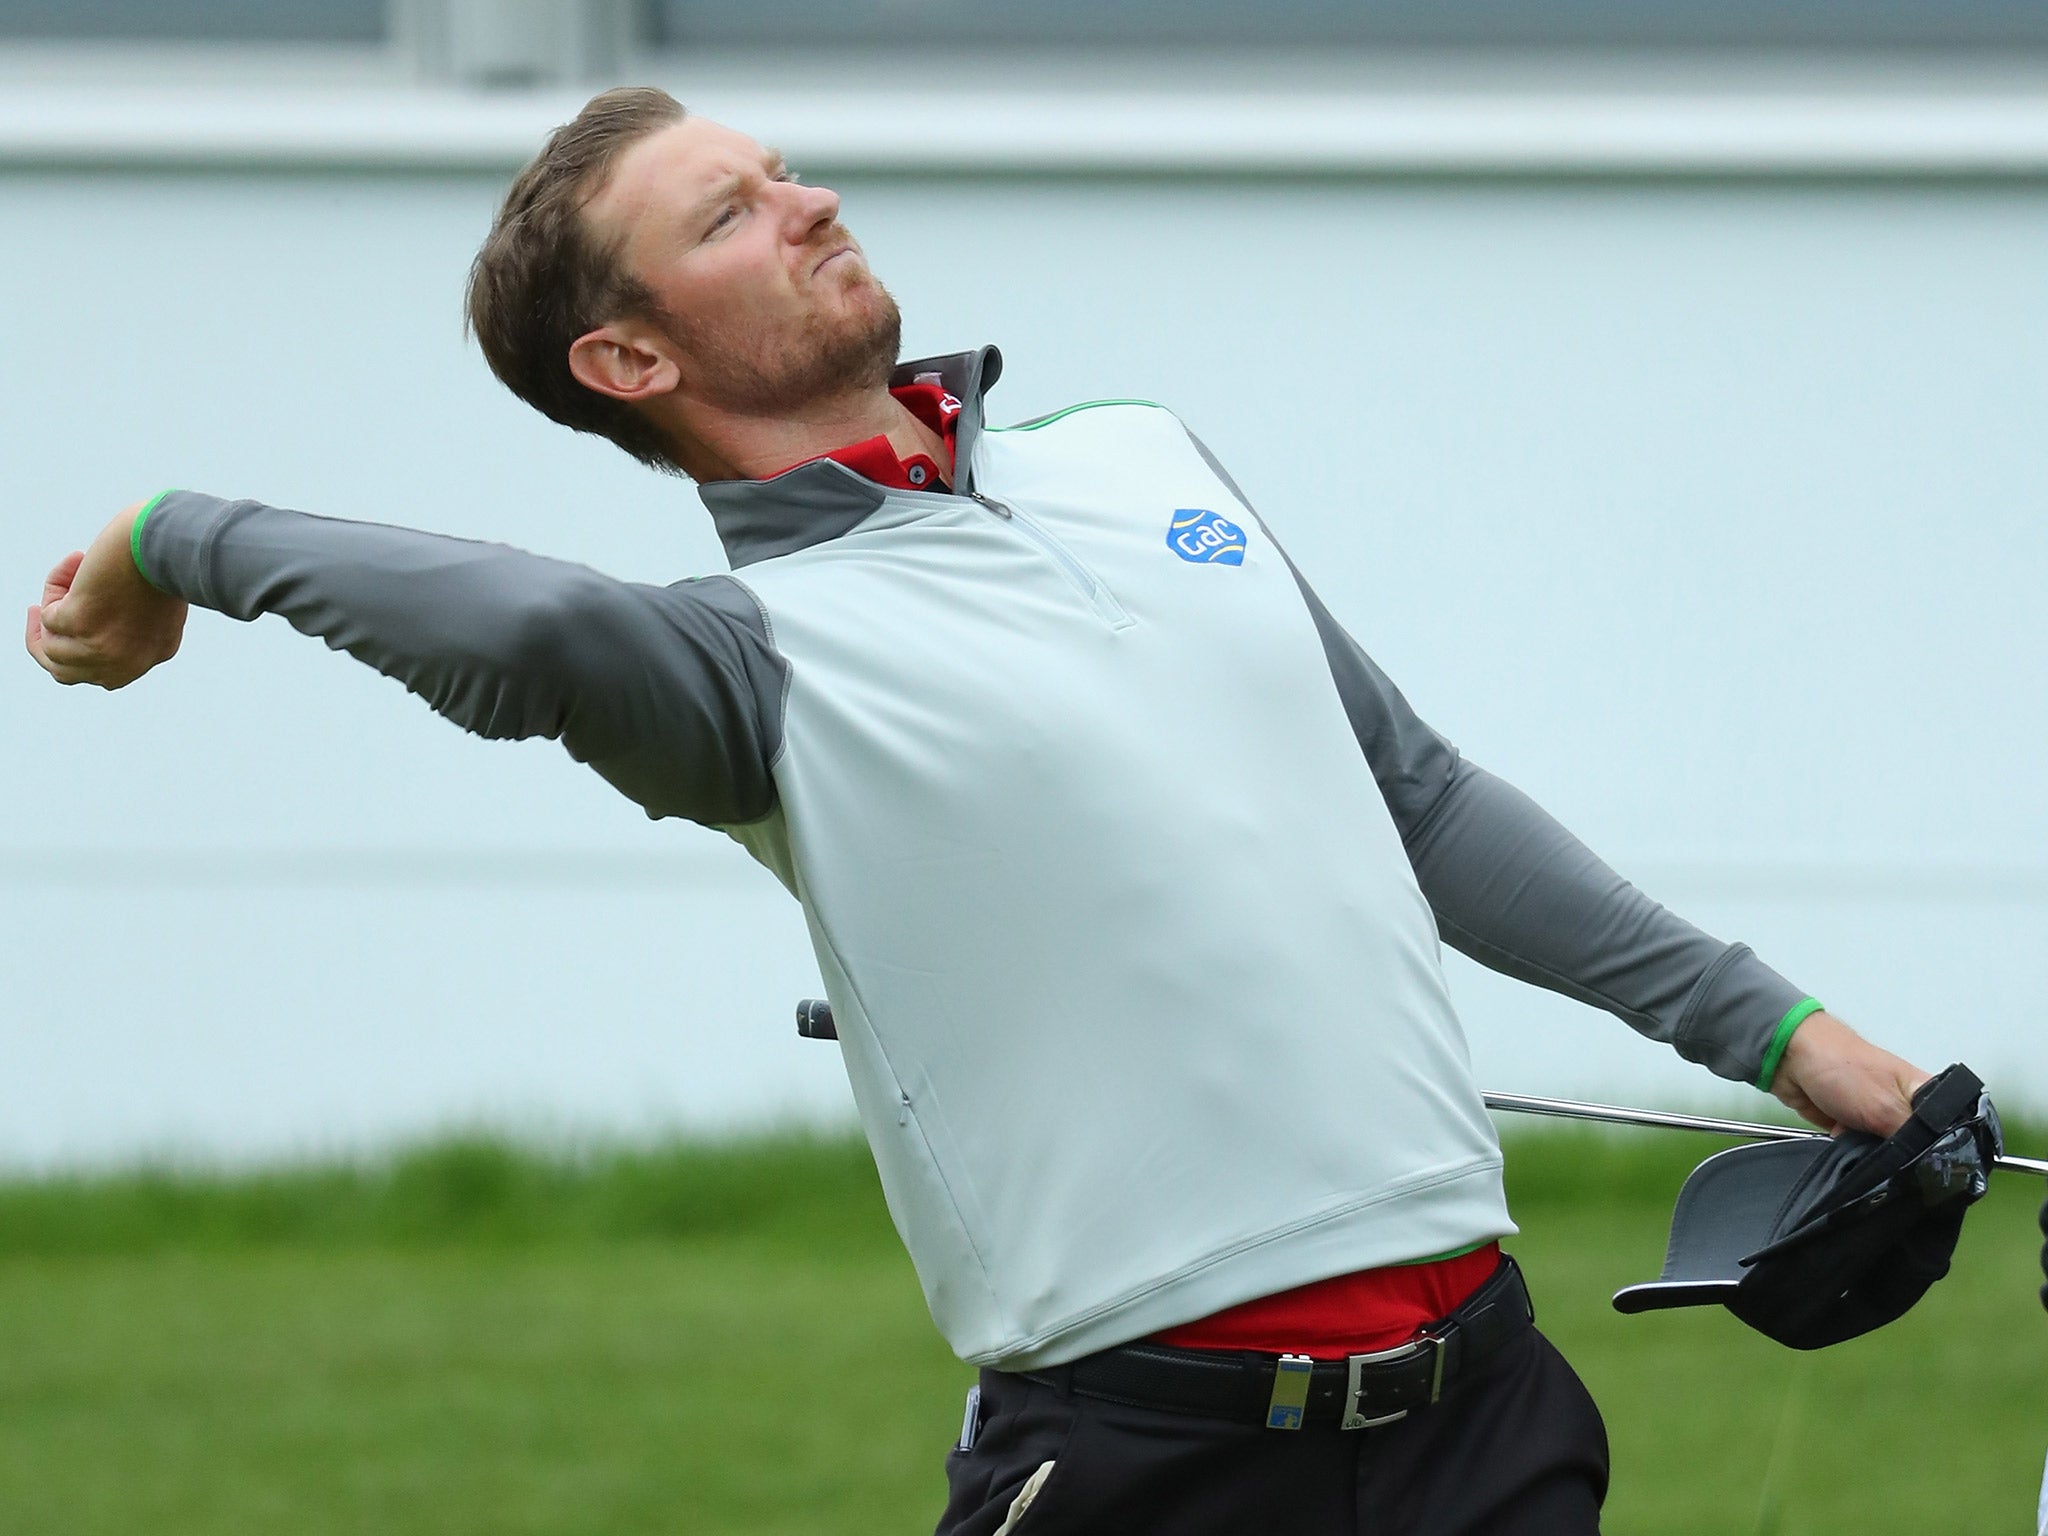 Chris Wood has moved into Ryder Cup contention with victory at Wentworth